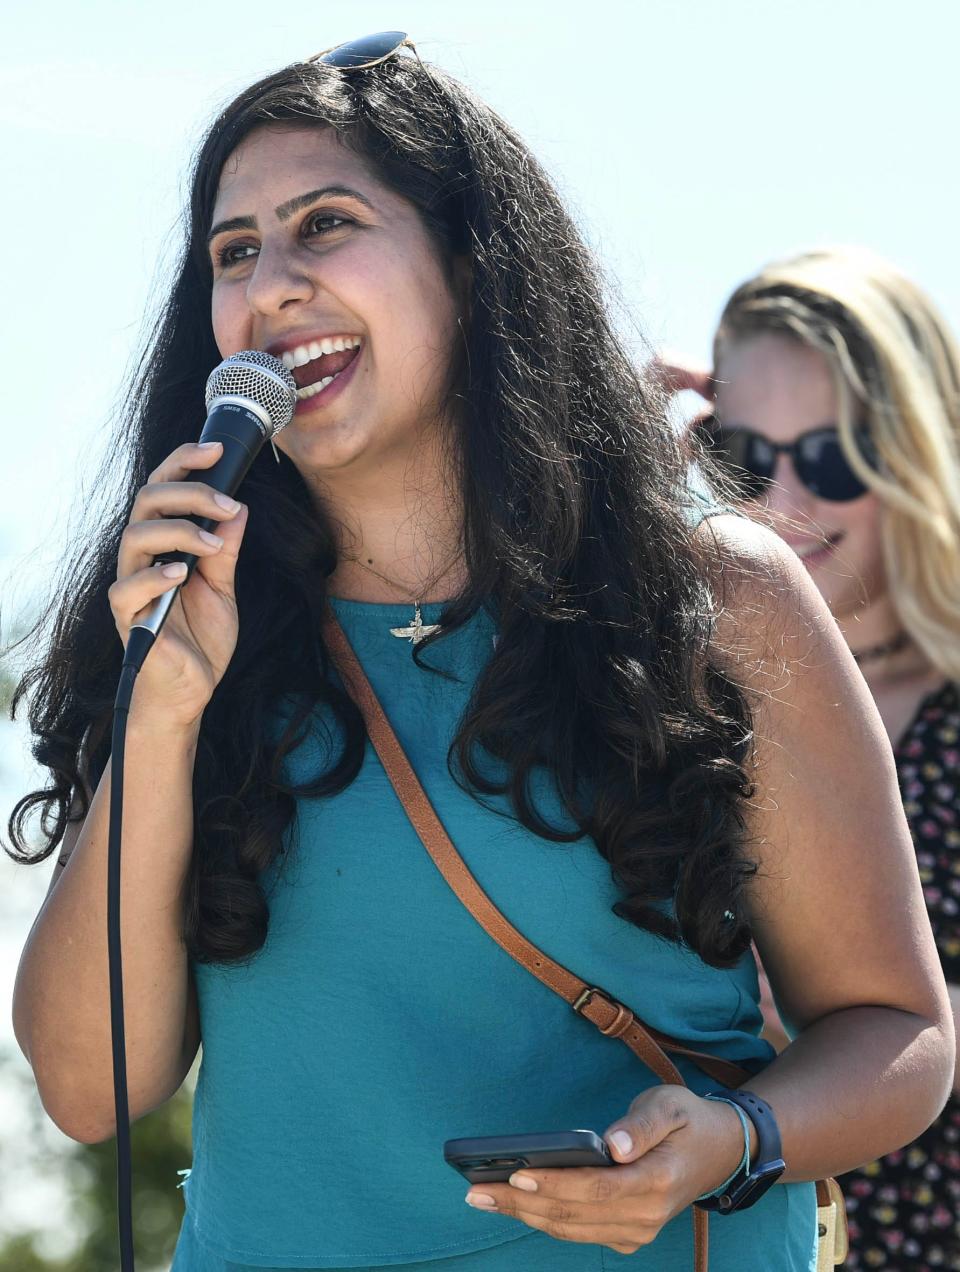 State Rep. Anna Eskamani (FL House Dist 42) addresses supporters of abortion rights during a rally along the Eau Gallie Causeway Saturday, April 8, 2023. Craig Bailey/FLORIDA TODAY via USA TODAY NETWORK